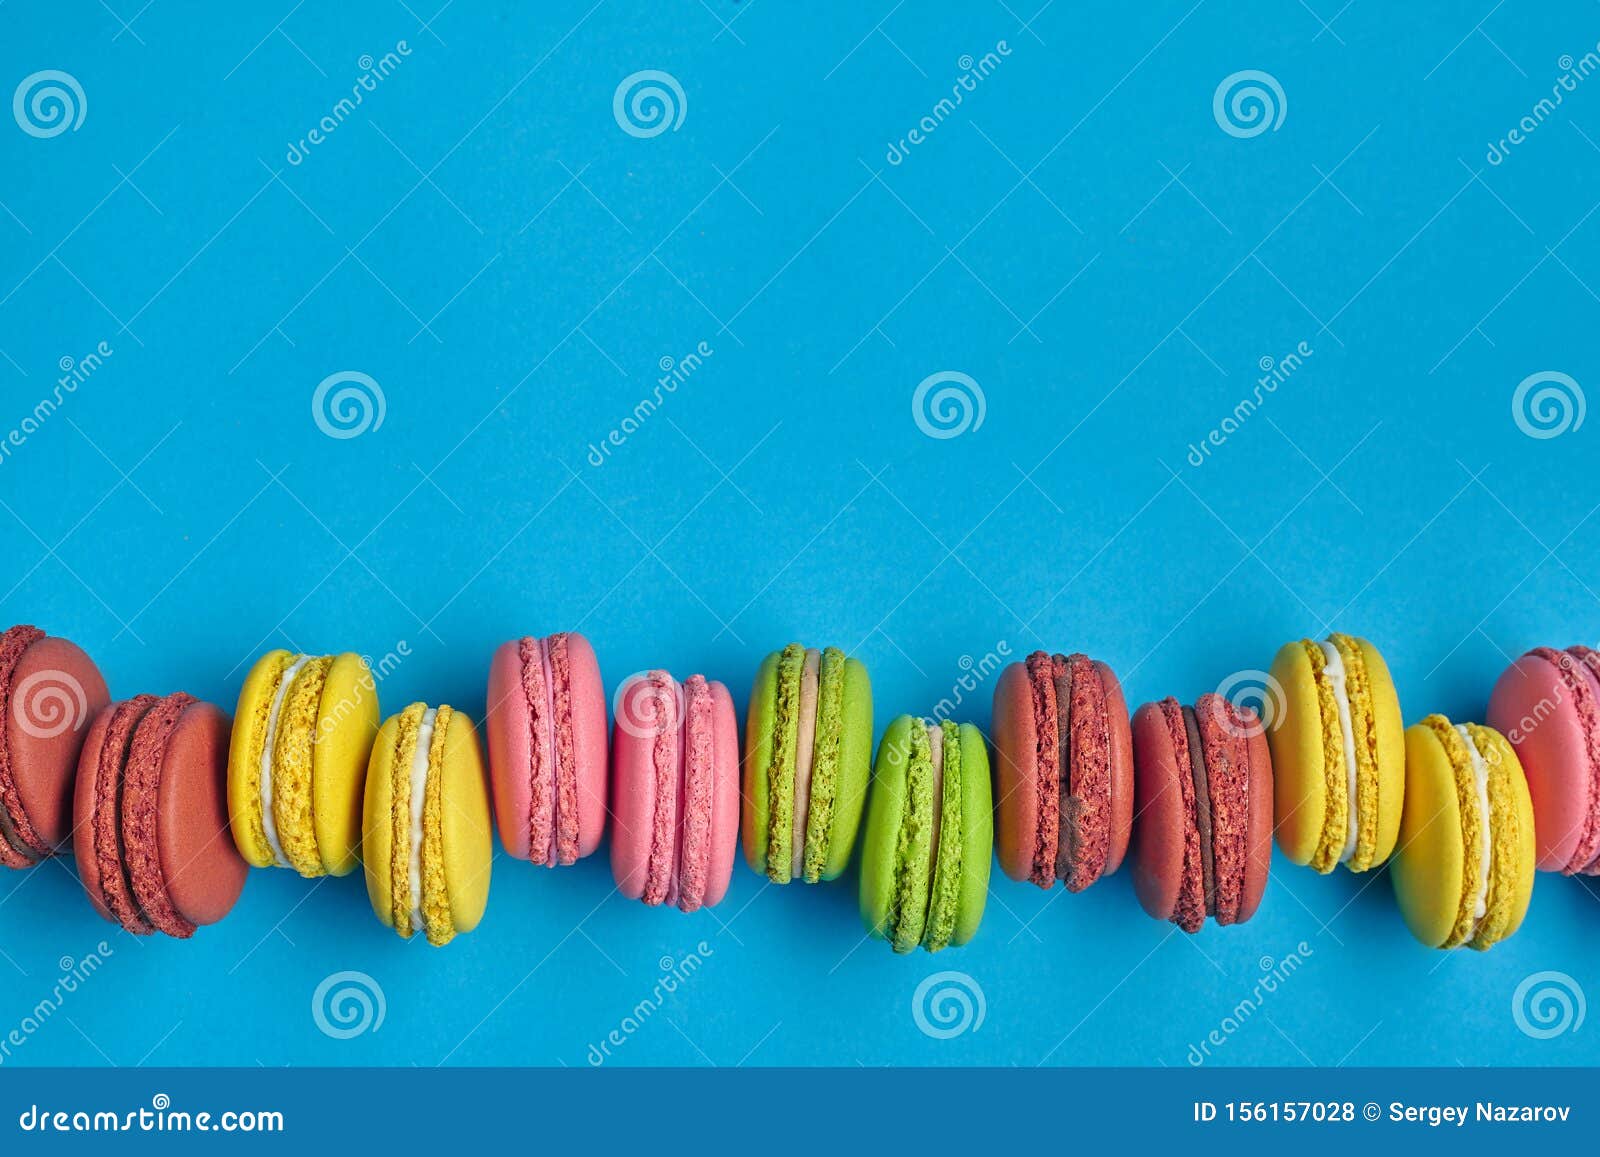 Colored Macaron or Macaroon, Sweet Meringue-based Confection on Blue ...